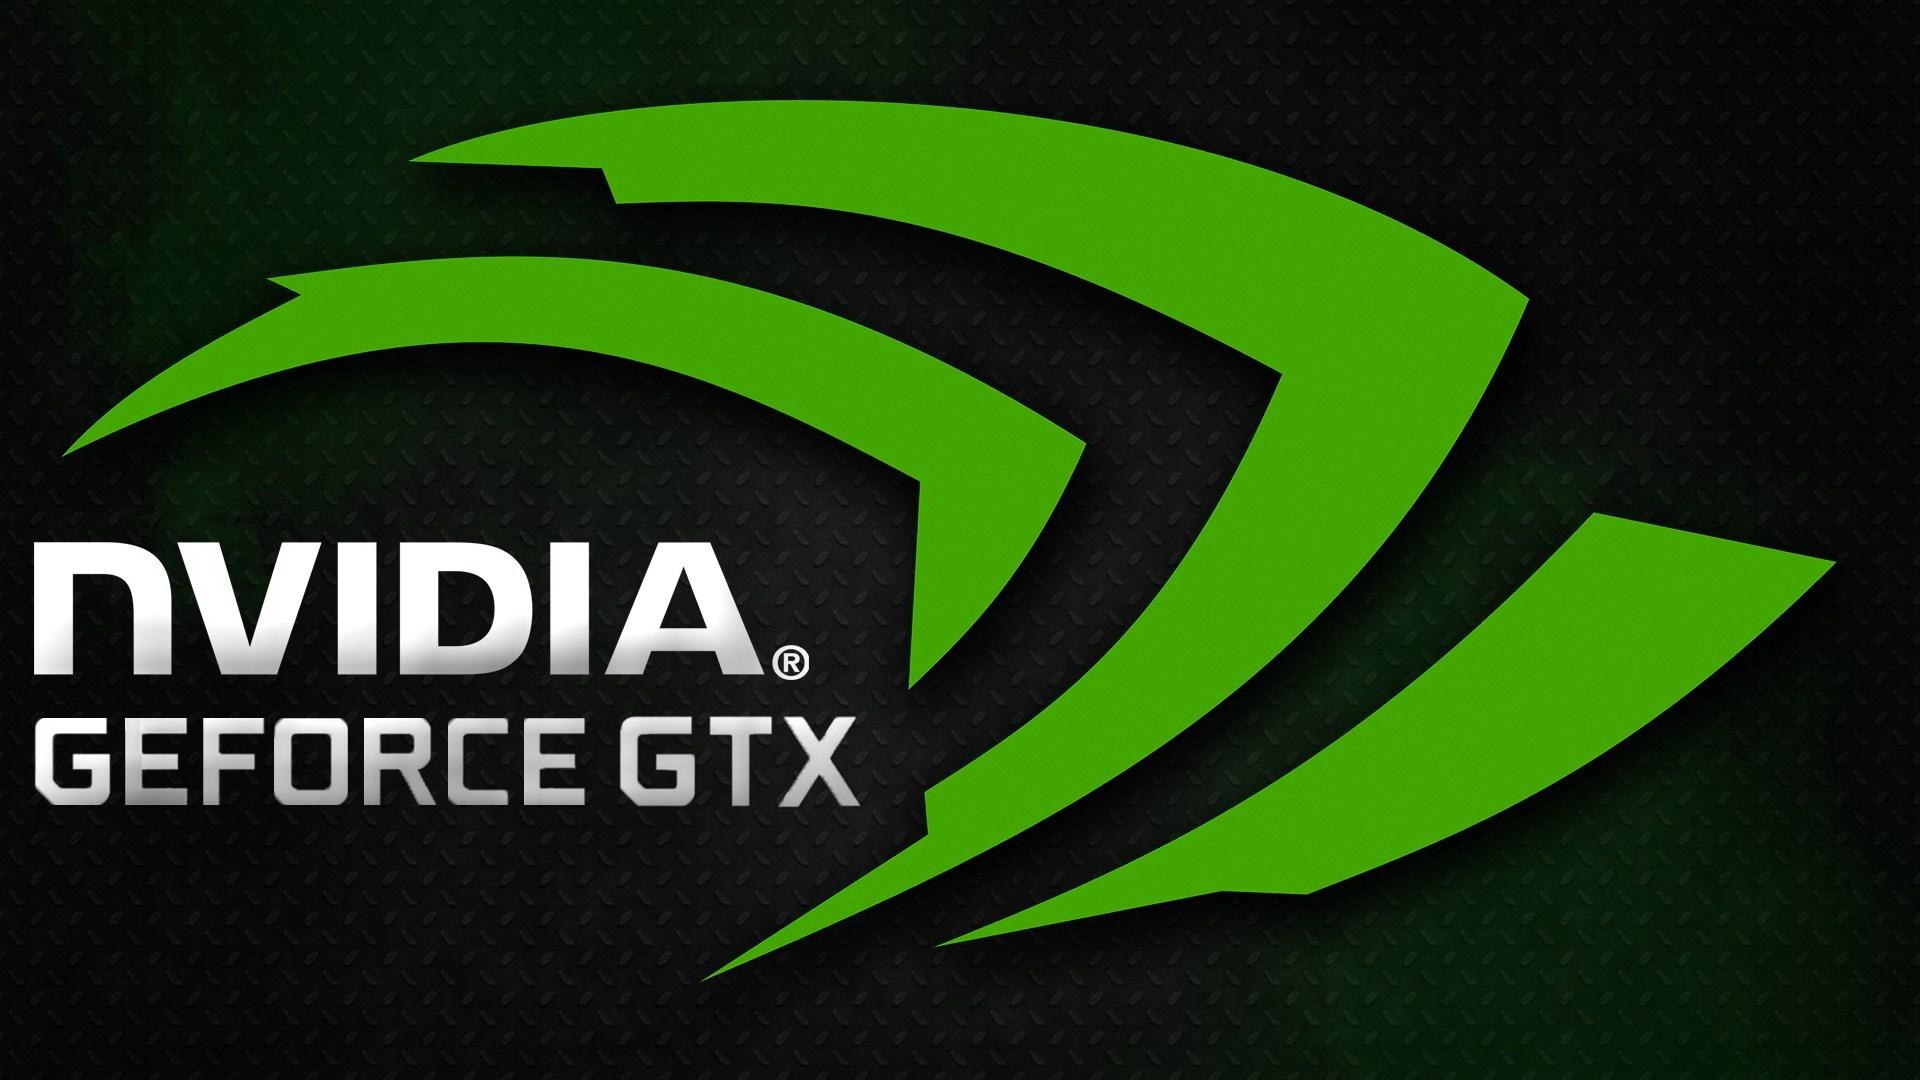 The GeForce GTX 1160 Ti is Reportedly Real And Image Surface